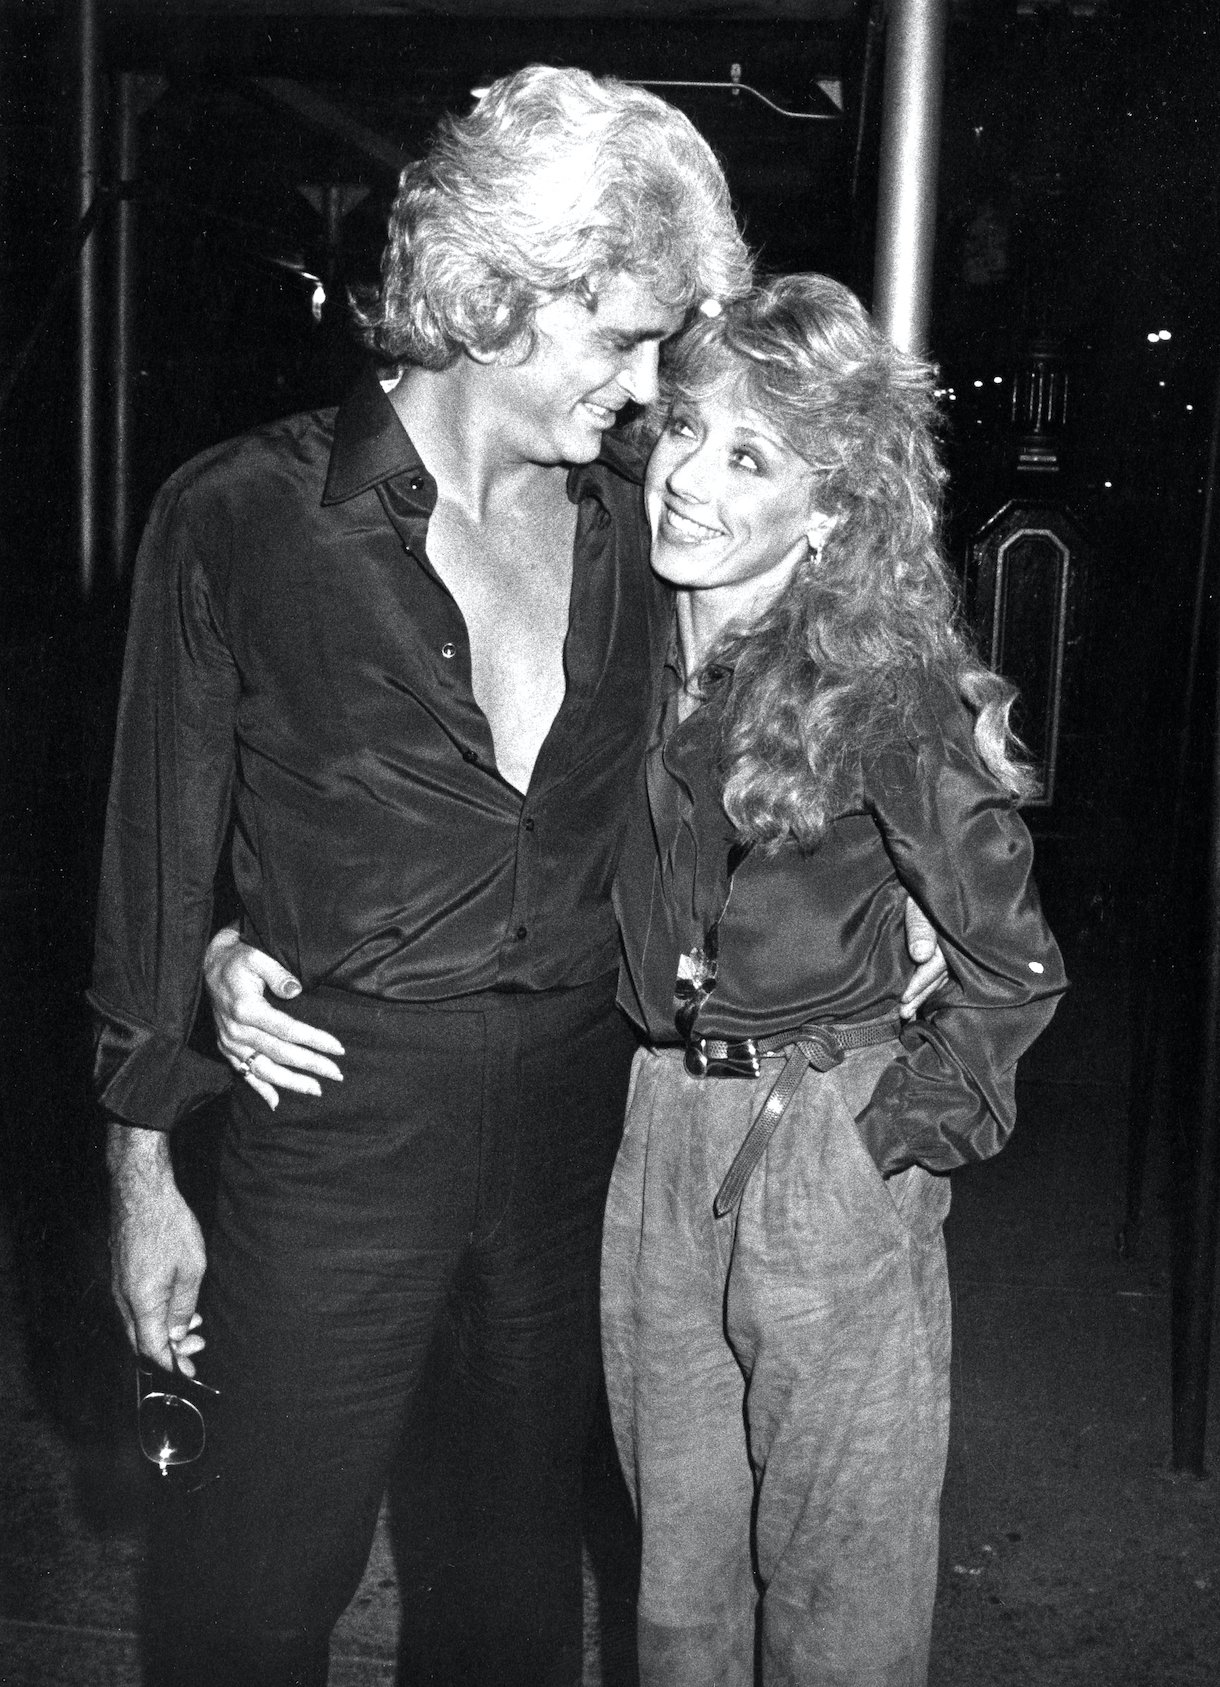 Michael Landon and wife Cindy Clerico sighted on November 21, 1982